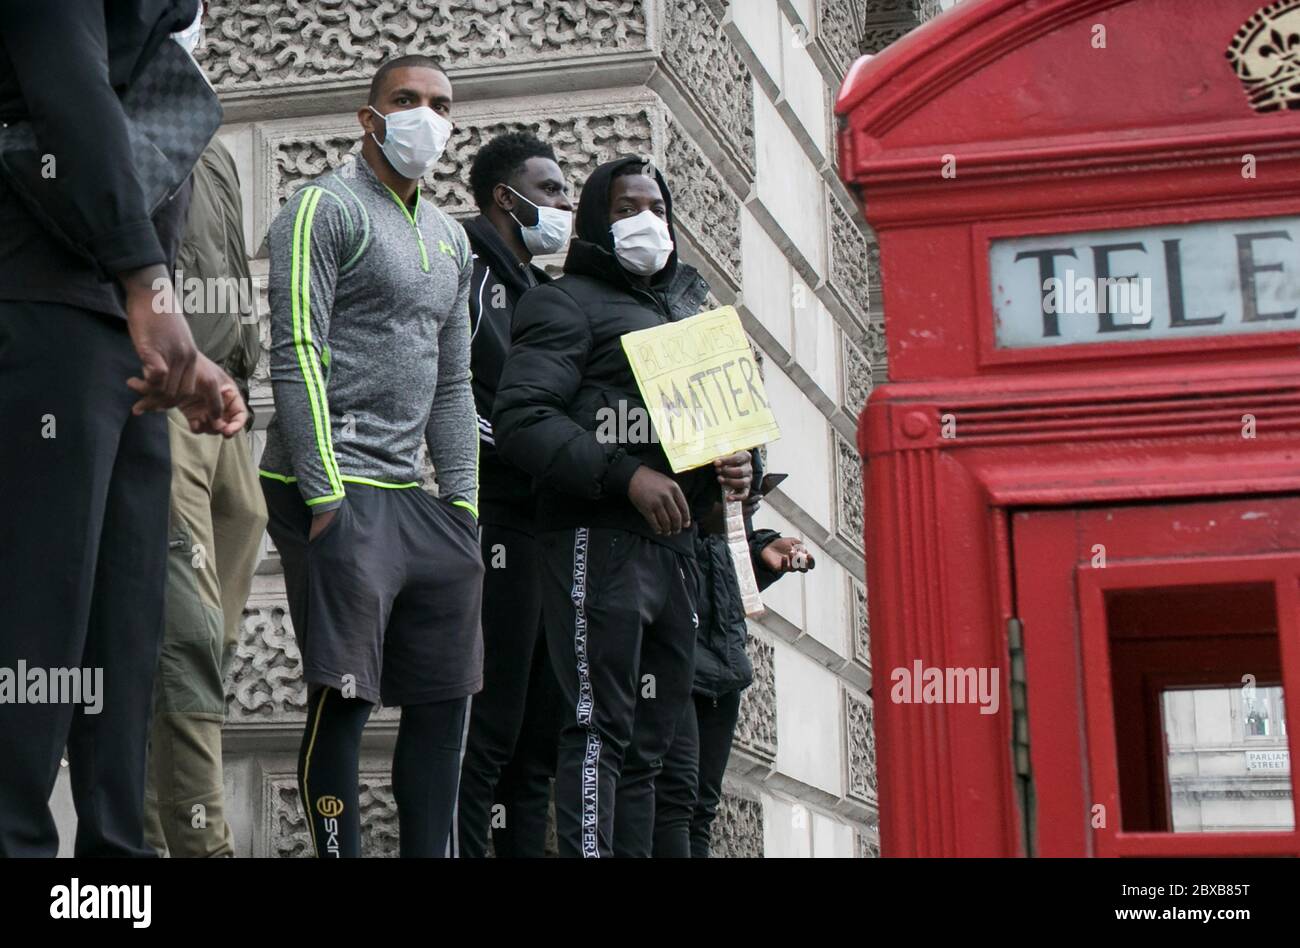 A group of young black men take part in the protest against systemic racism in the UK held in central London, UK. Stock Photo